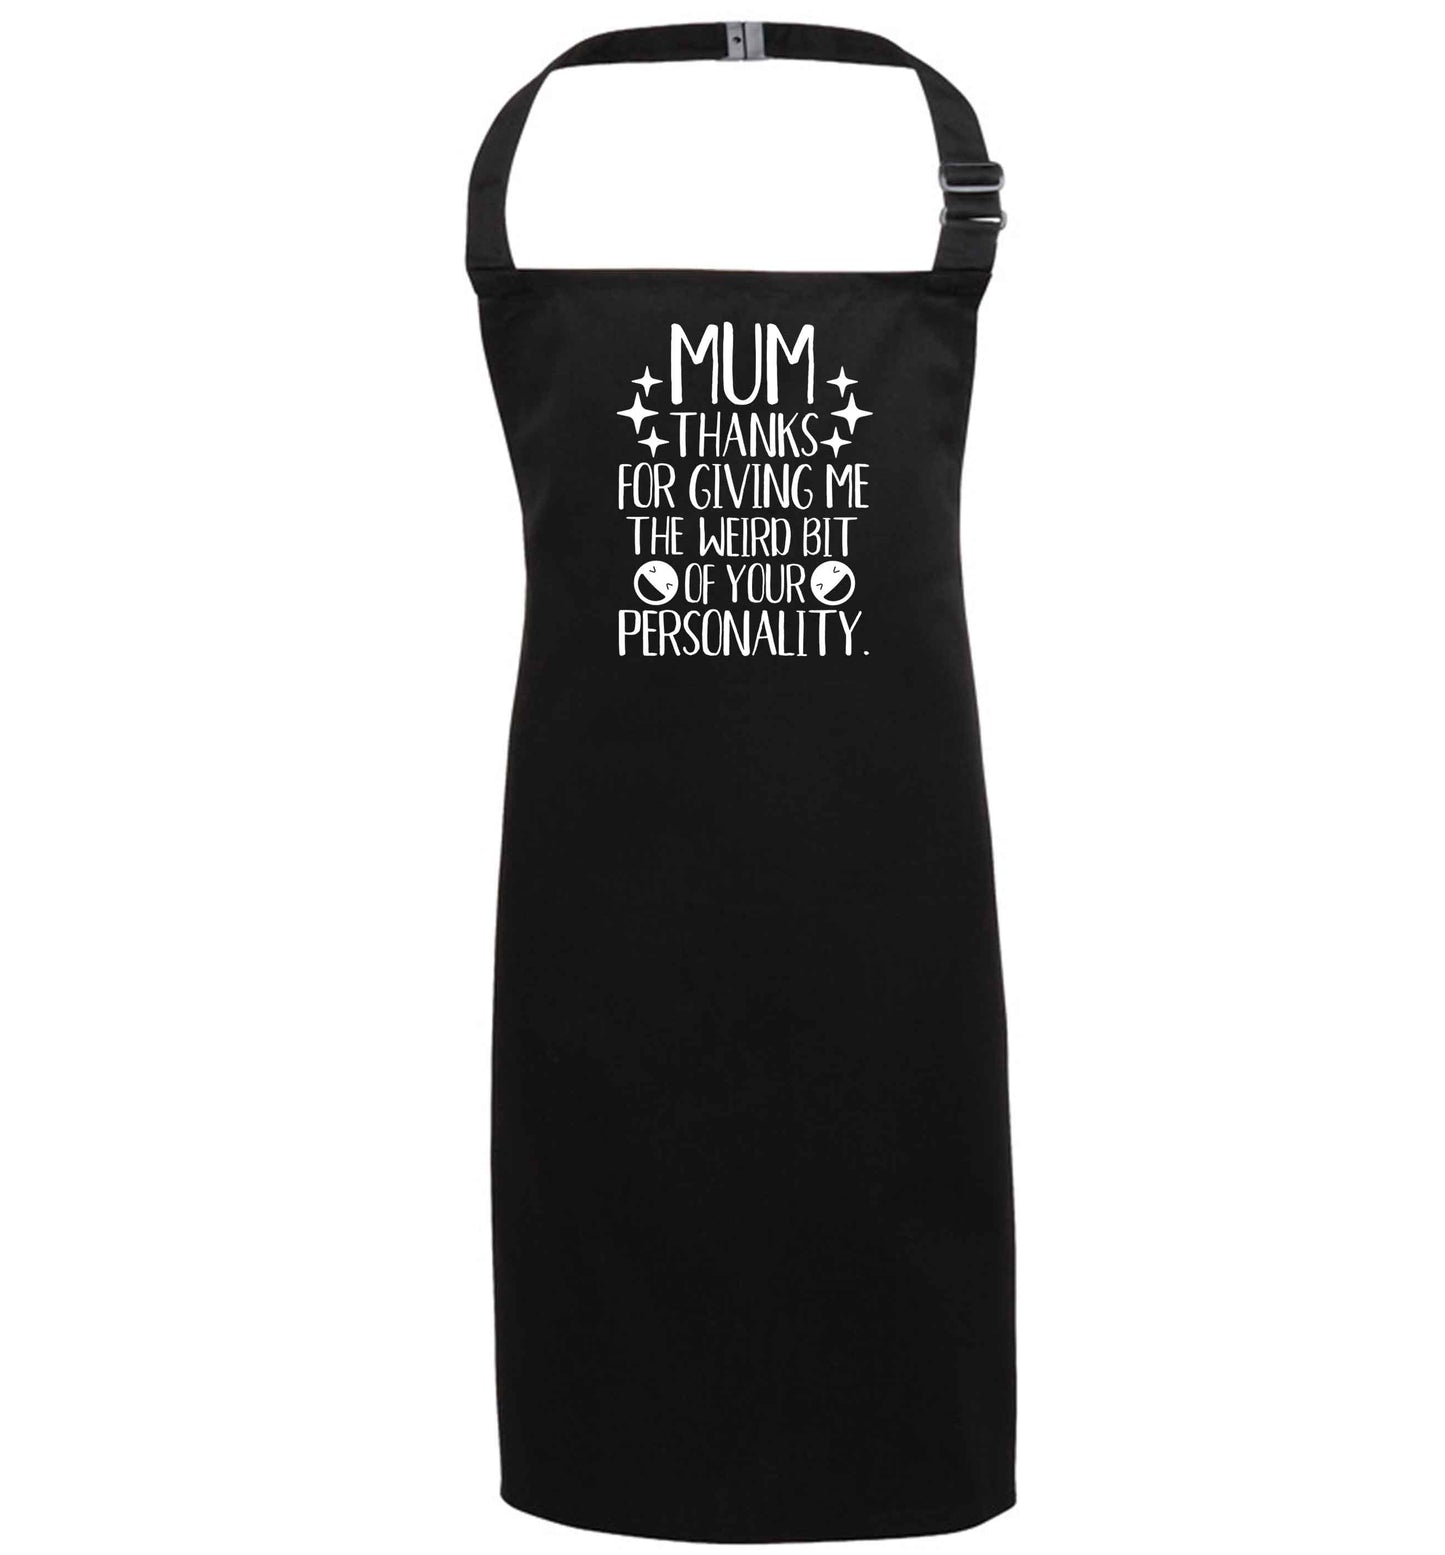 Mum thanks for giving me the weird bit of your personality black apron 7-10 years